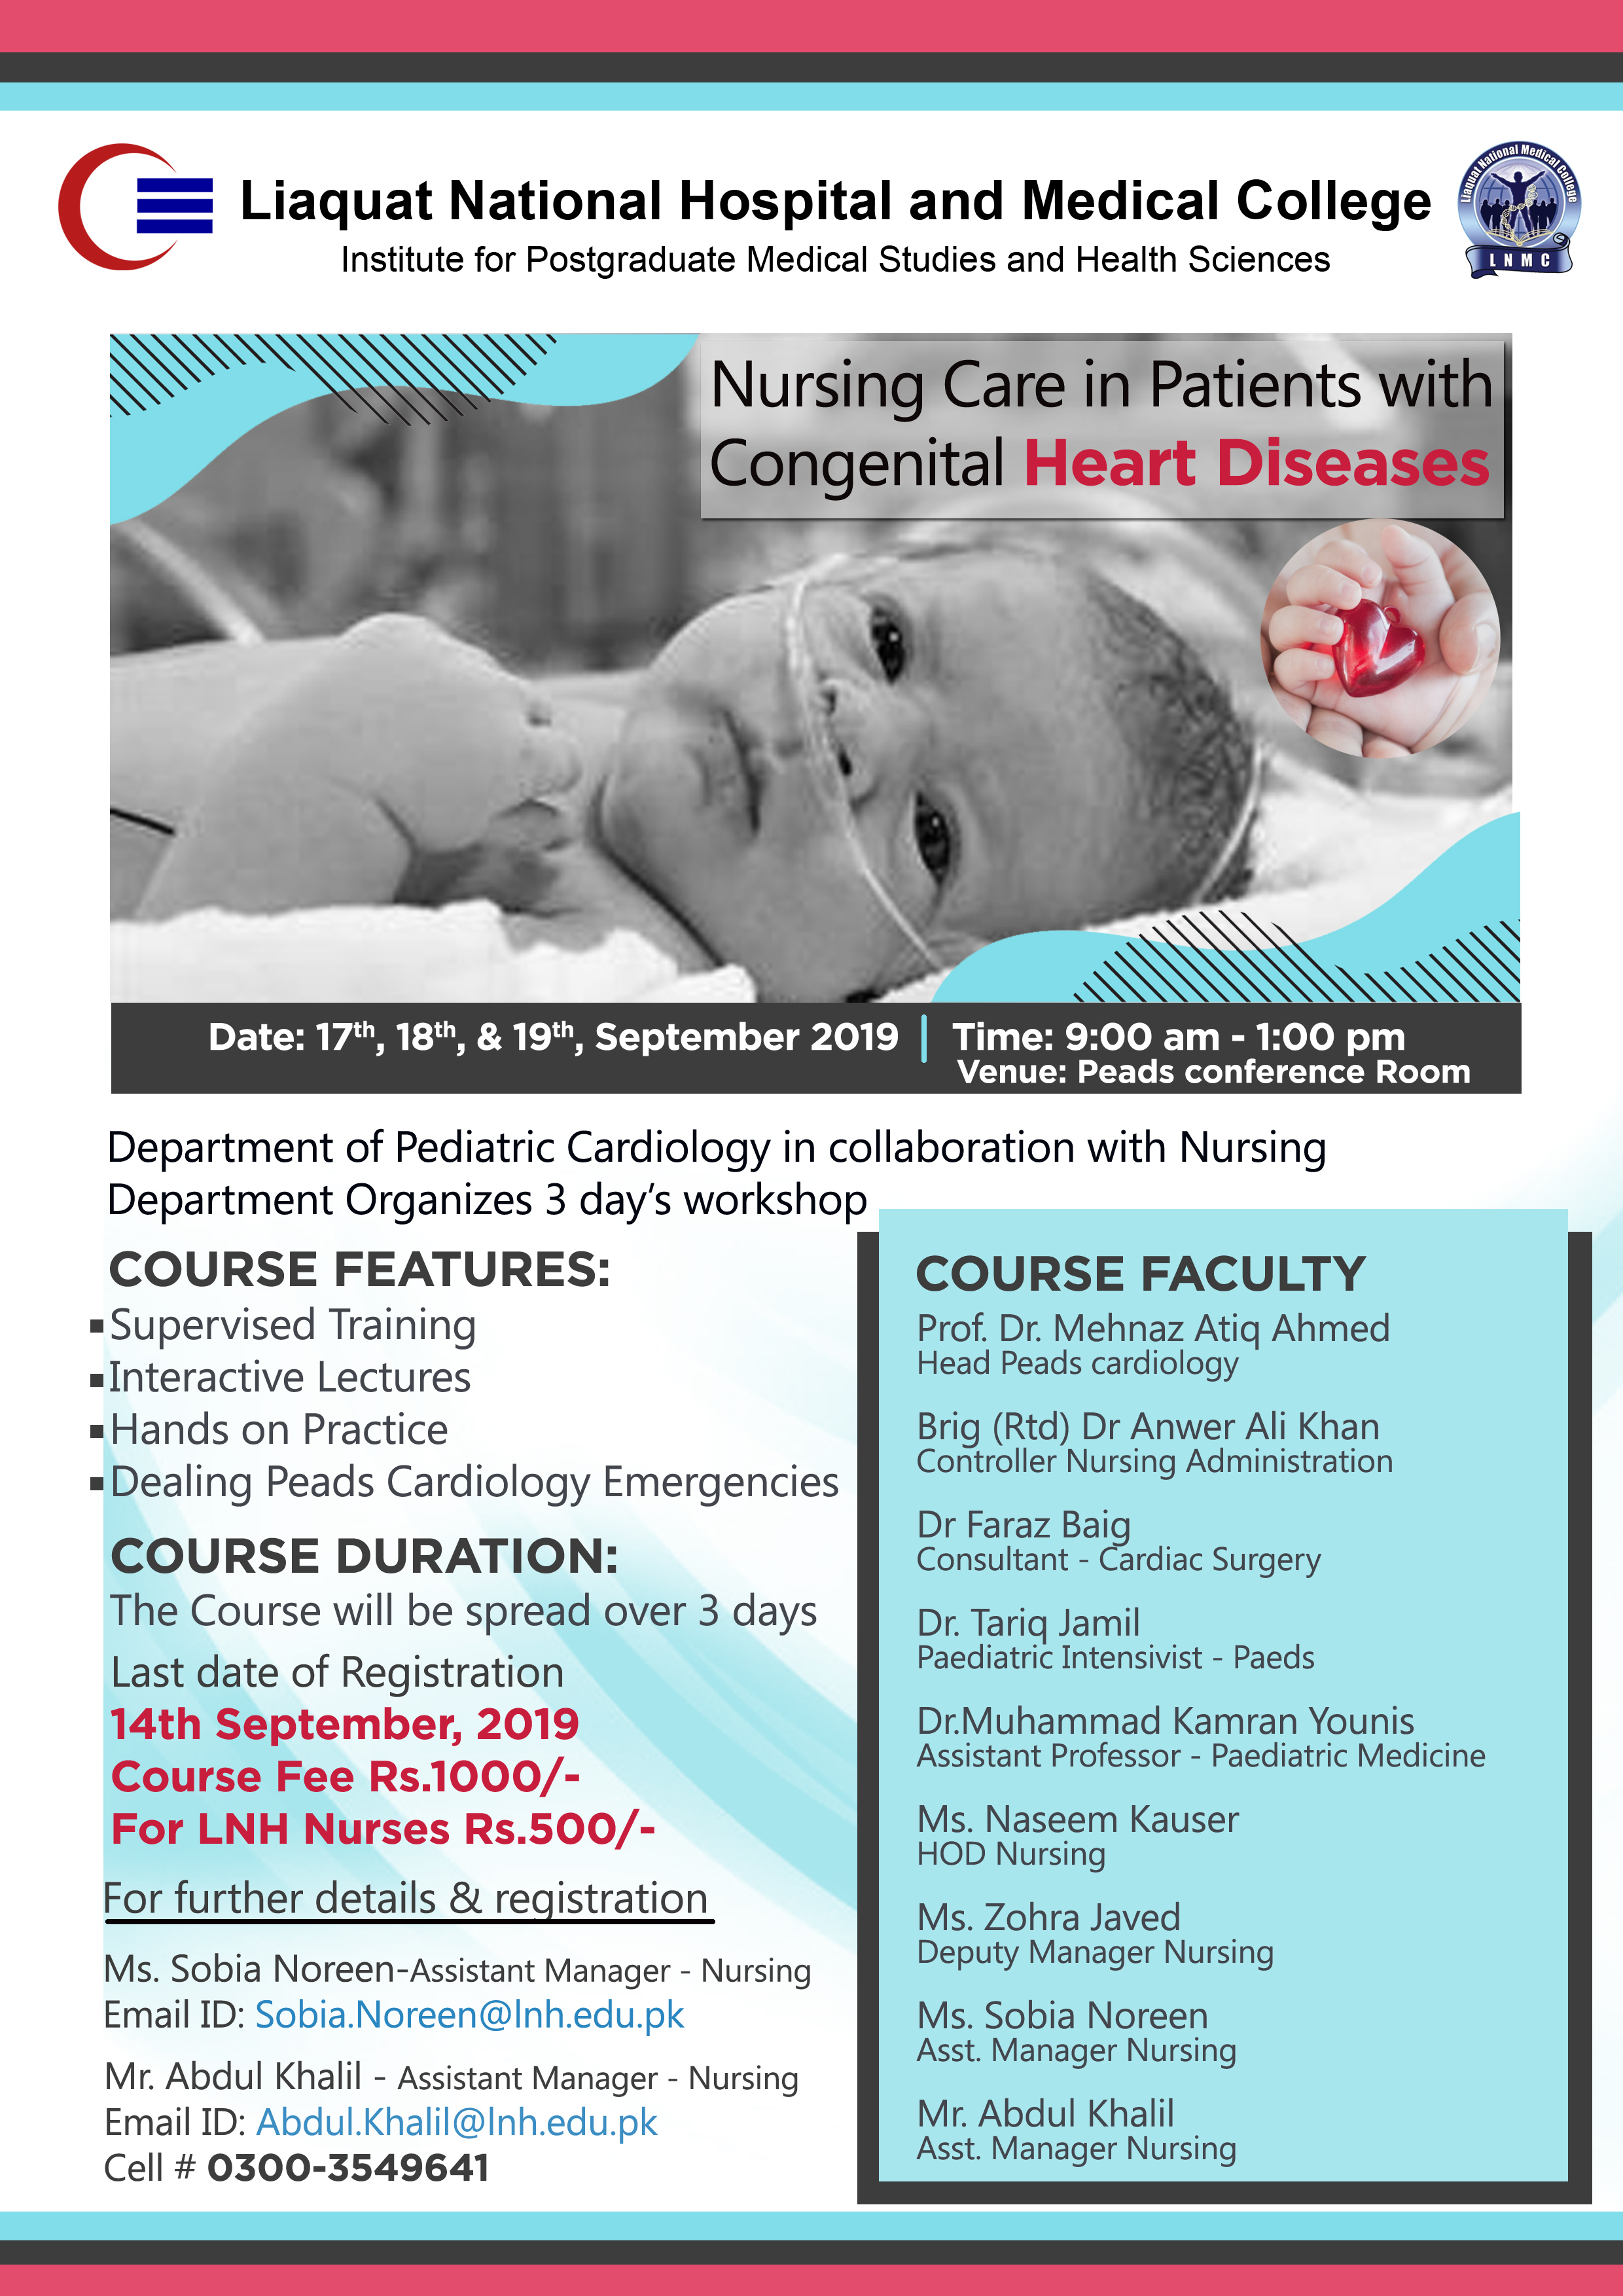 Nursing Care in Patients with Congenital Heart Diseases